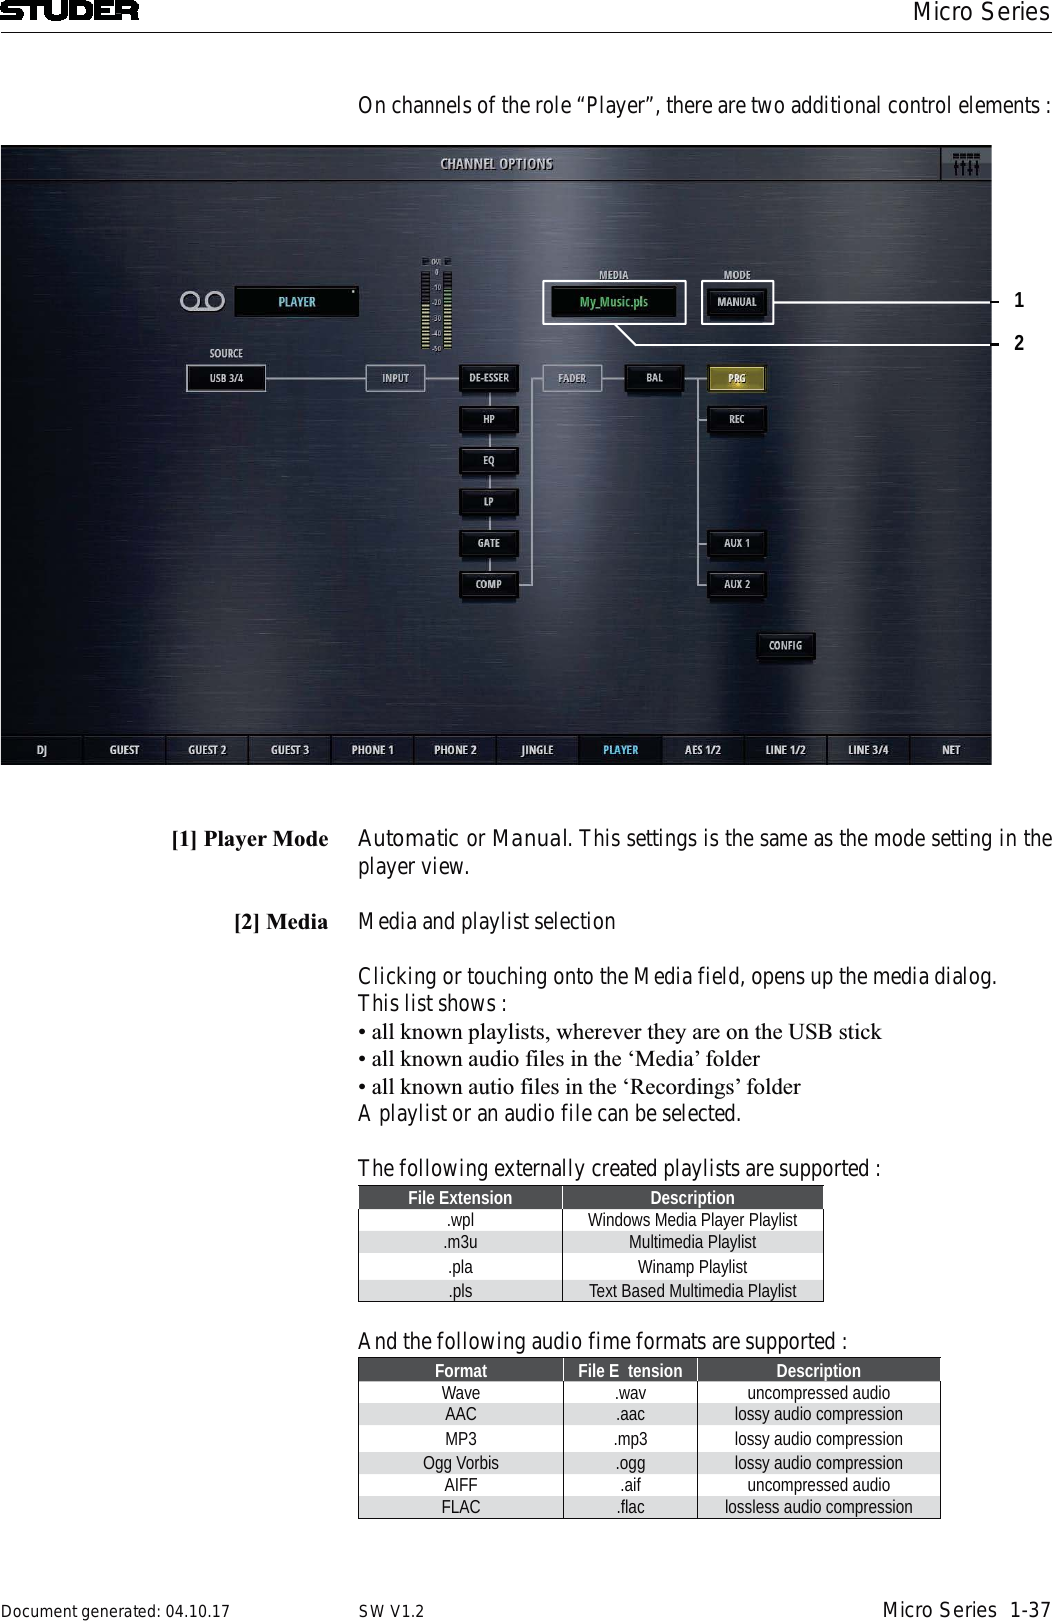 Micro SeriesMicro Series 1-37Document generated: 04.10.17 SW V1.2On channels of the role “Player”, there are two additional control elements : 12[1] Player Mode Automatic or Manual. This settings is the same as the mode setting in the player view.[2] Media Media and playlist selectionClicking or touching onto the Media field, opens up the media dialog.This list shows :      A playlist or an audio file can be selected.The following externally created playlists are supported :File Extension Description.wpl Windows Media Player Playlist.m3u Multimedia Playlist.pla Winamp Playlist.pls Text Based Multimedia PlaylistAnd the following audio fime formats are supported :Format File E tension DescriptionWave .wav uncompressed audioAAC .aac lossy audio compressionMP3 .mp3 lossy audio compressionOgg Vorbis .ogg lossy audio compressionAIFF .aif uncompressed audioFLAC .flac lossless audio compression